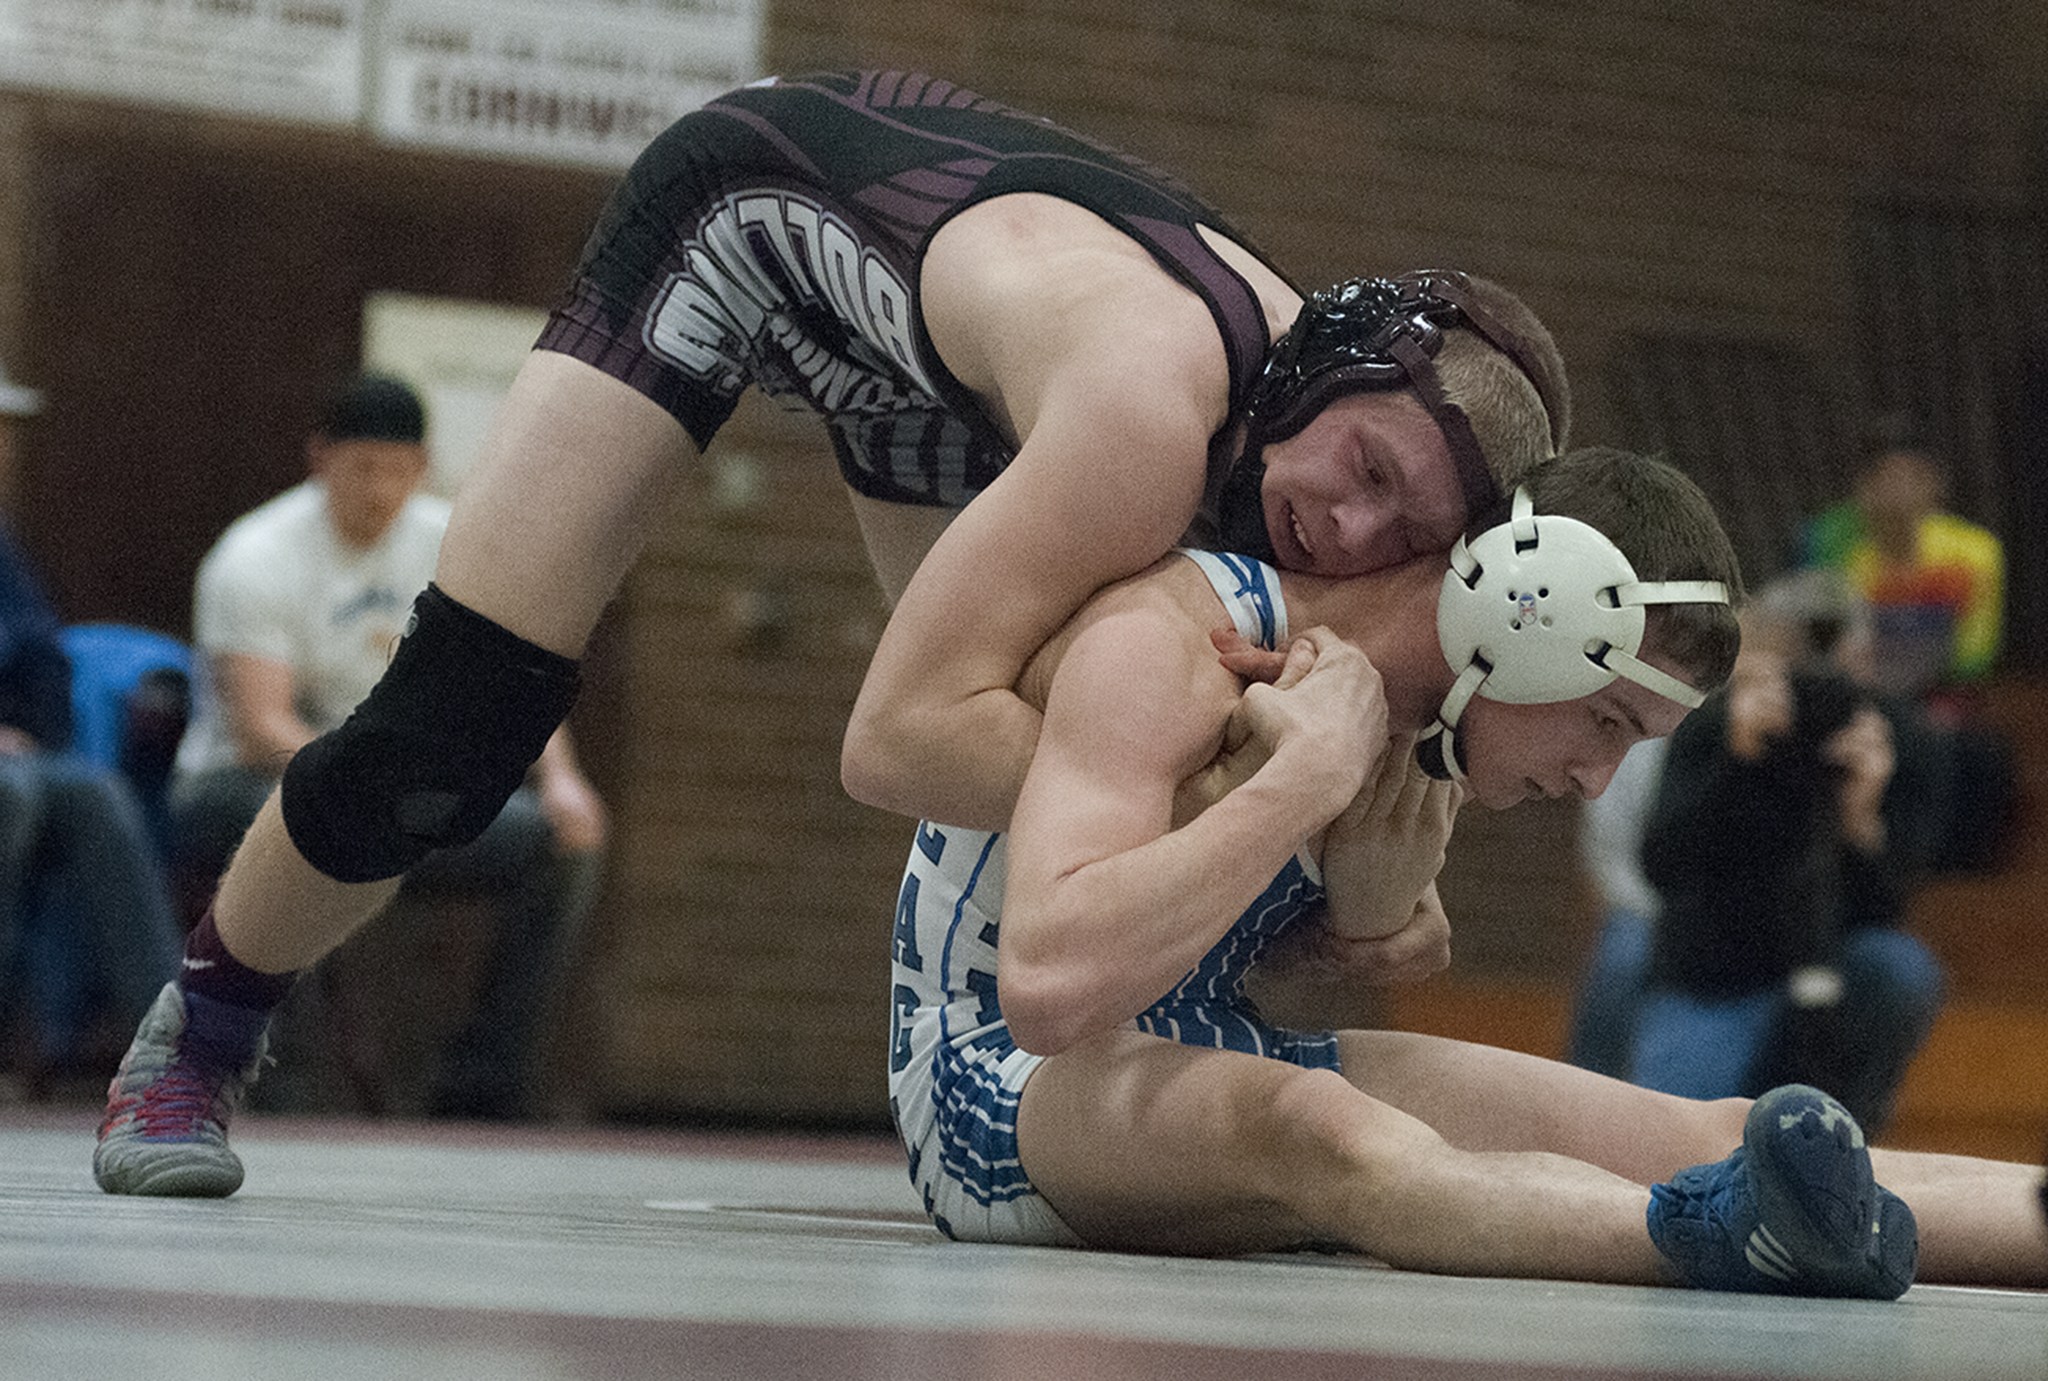 Monte muscles elma to the mat, 55-21